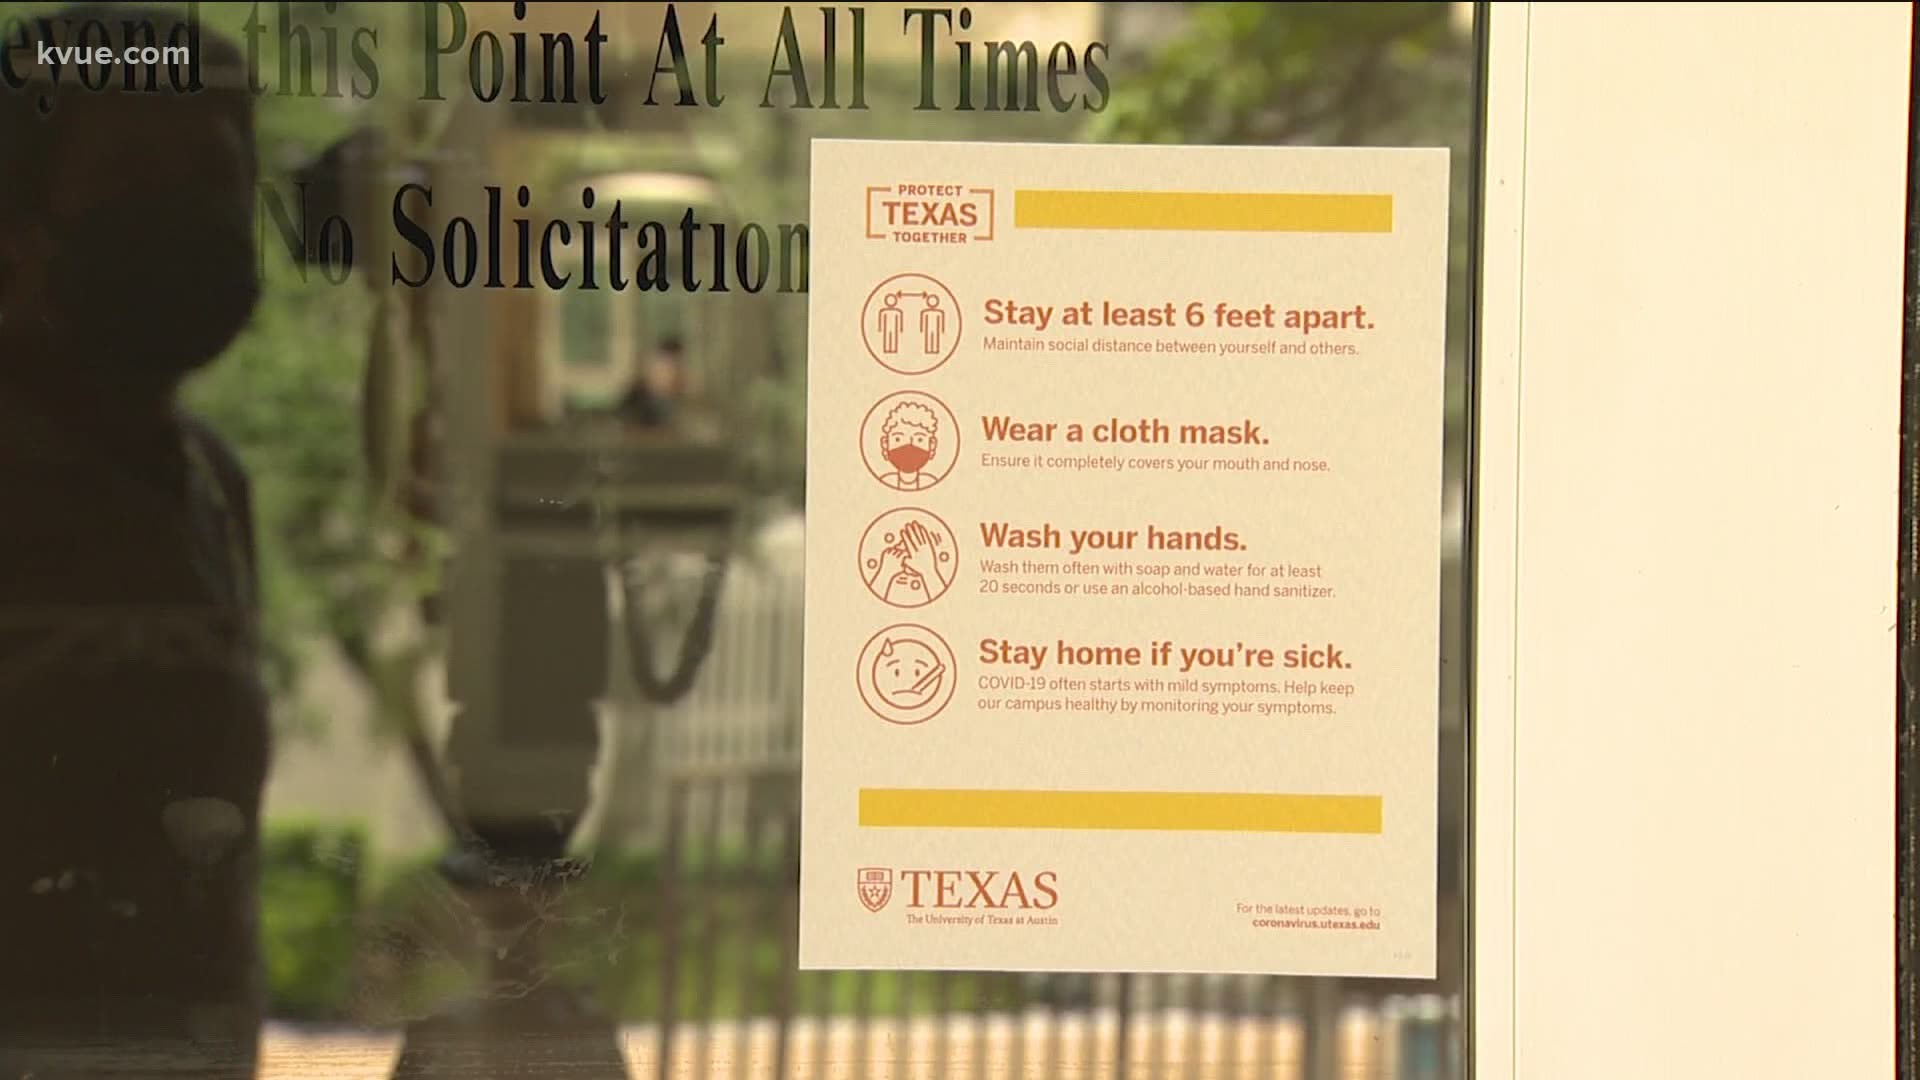 Thousands of Longhorn students will start moving back on campus next week.